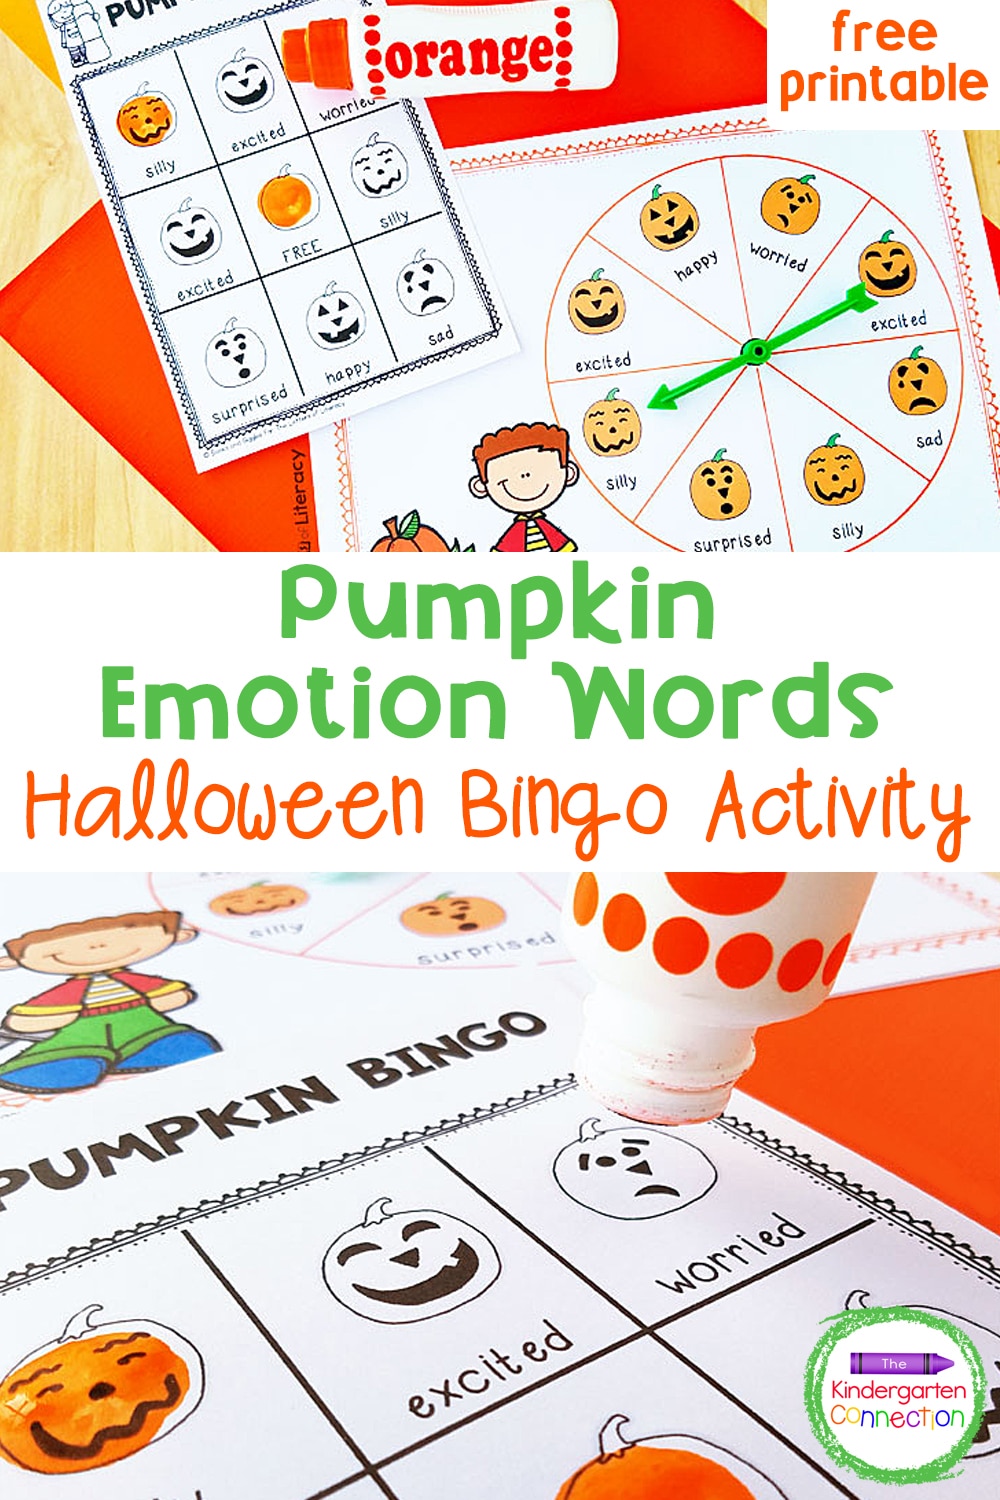 Working on emotion words with your Preschool or Kindergarten class? This free printable Halloween Bingo activity is so fun for identifying emotions! 